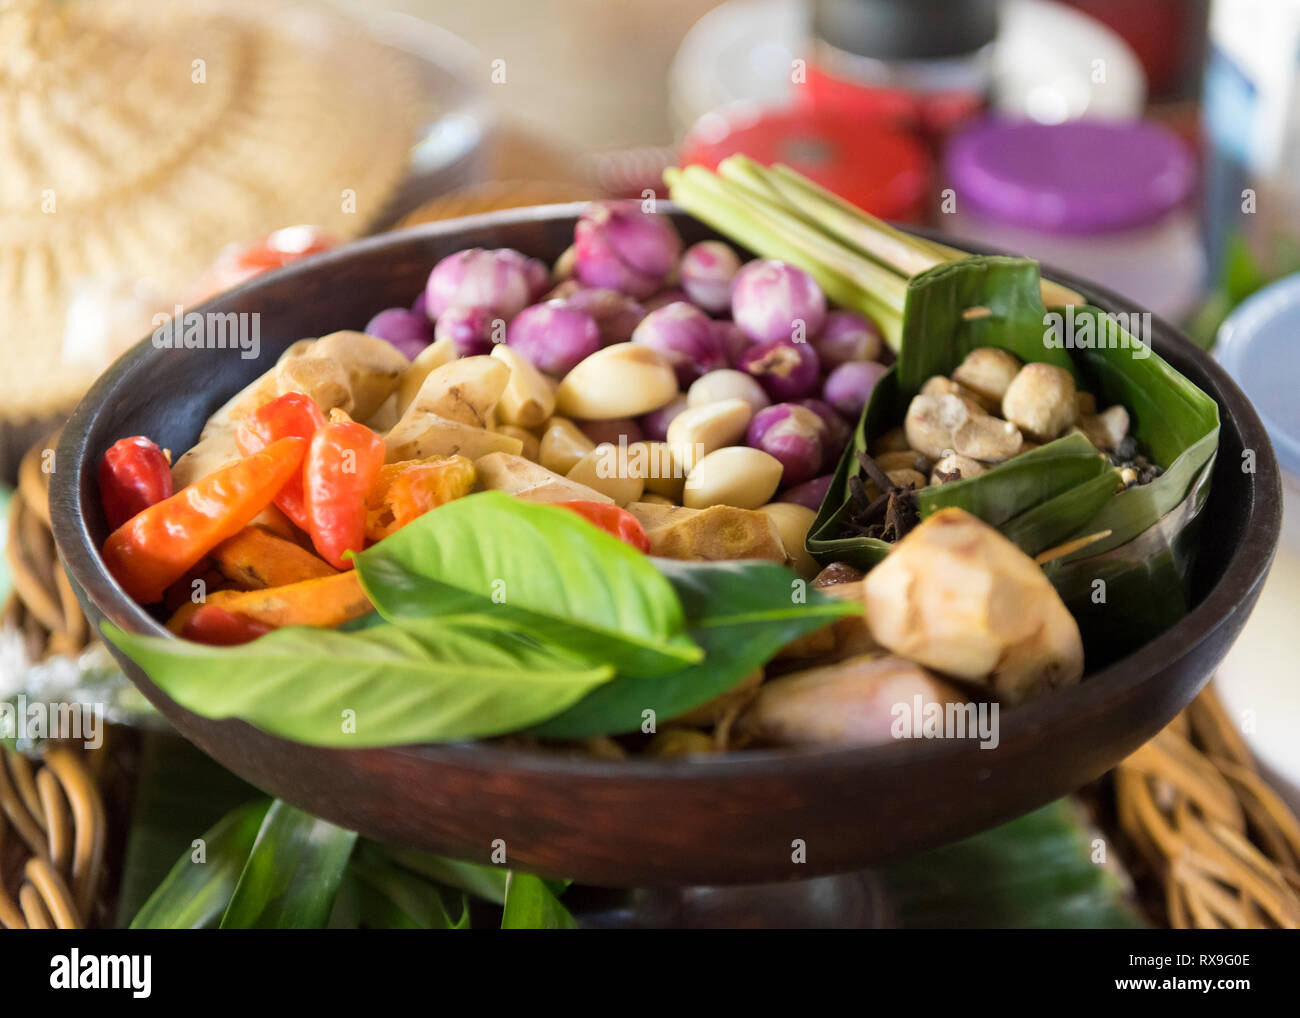 High angle view of various food ingredients in bowl on table Stock Photo